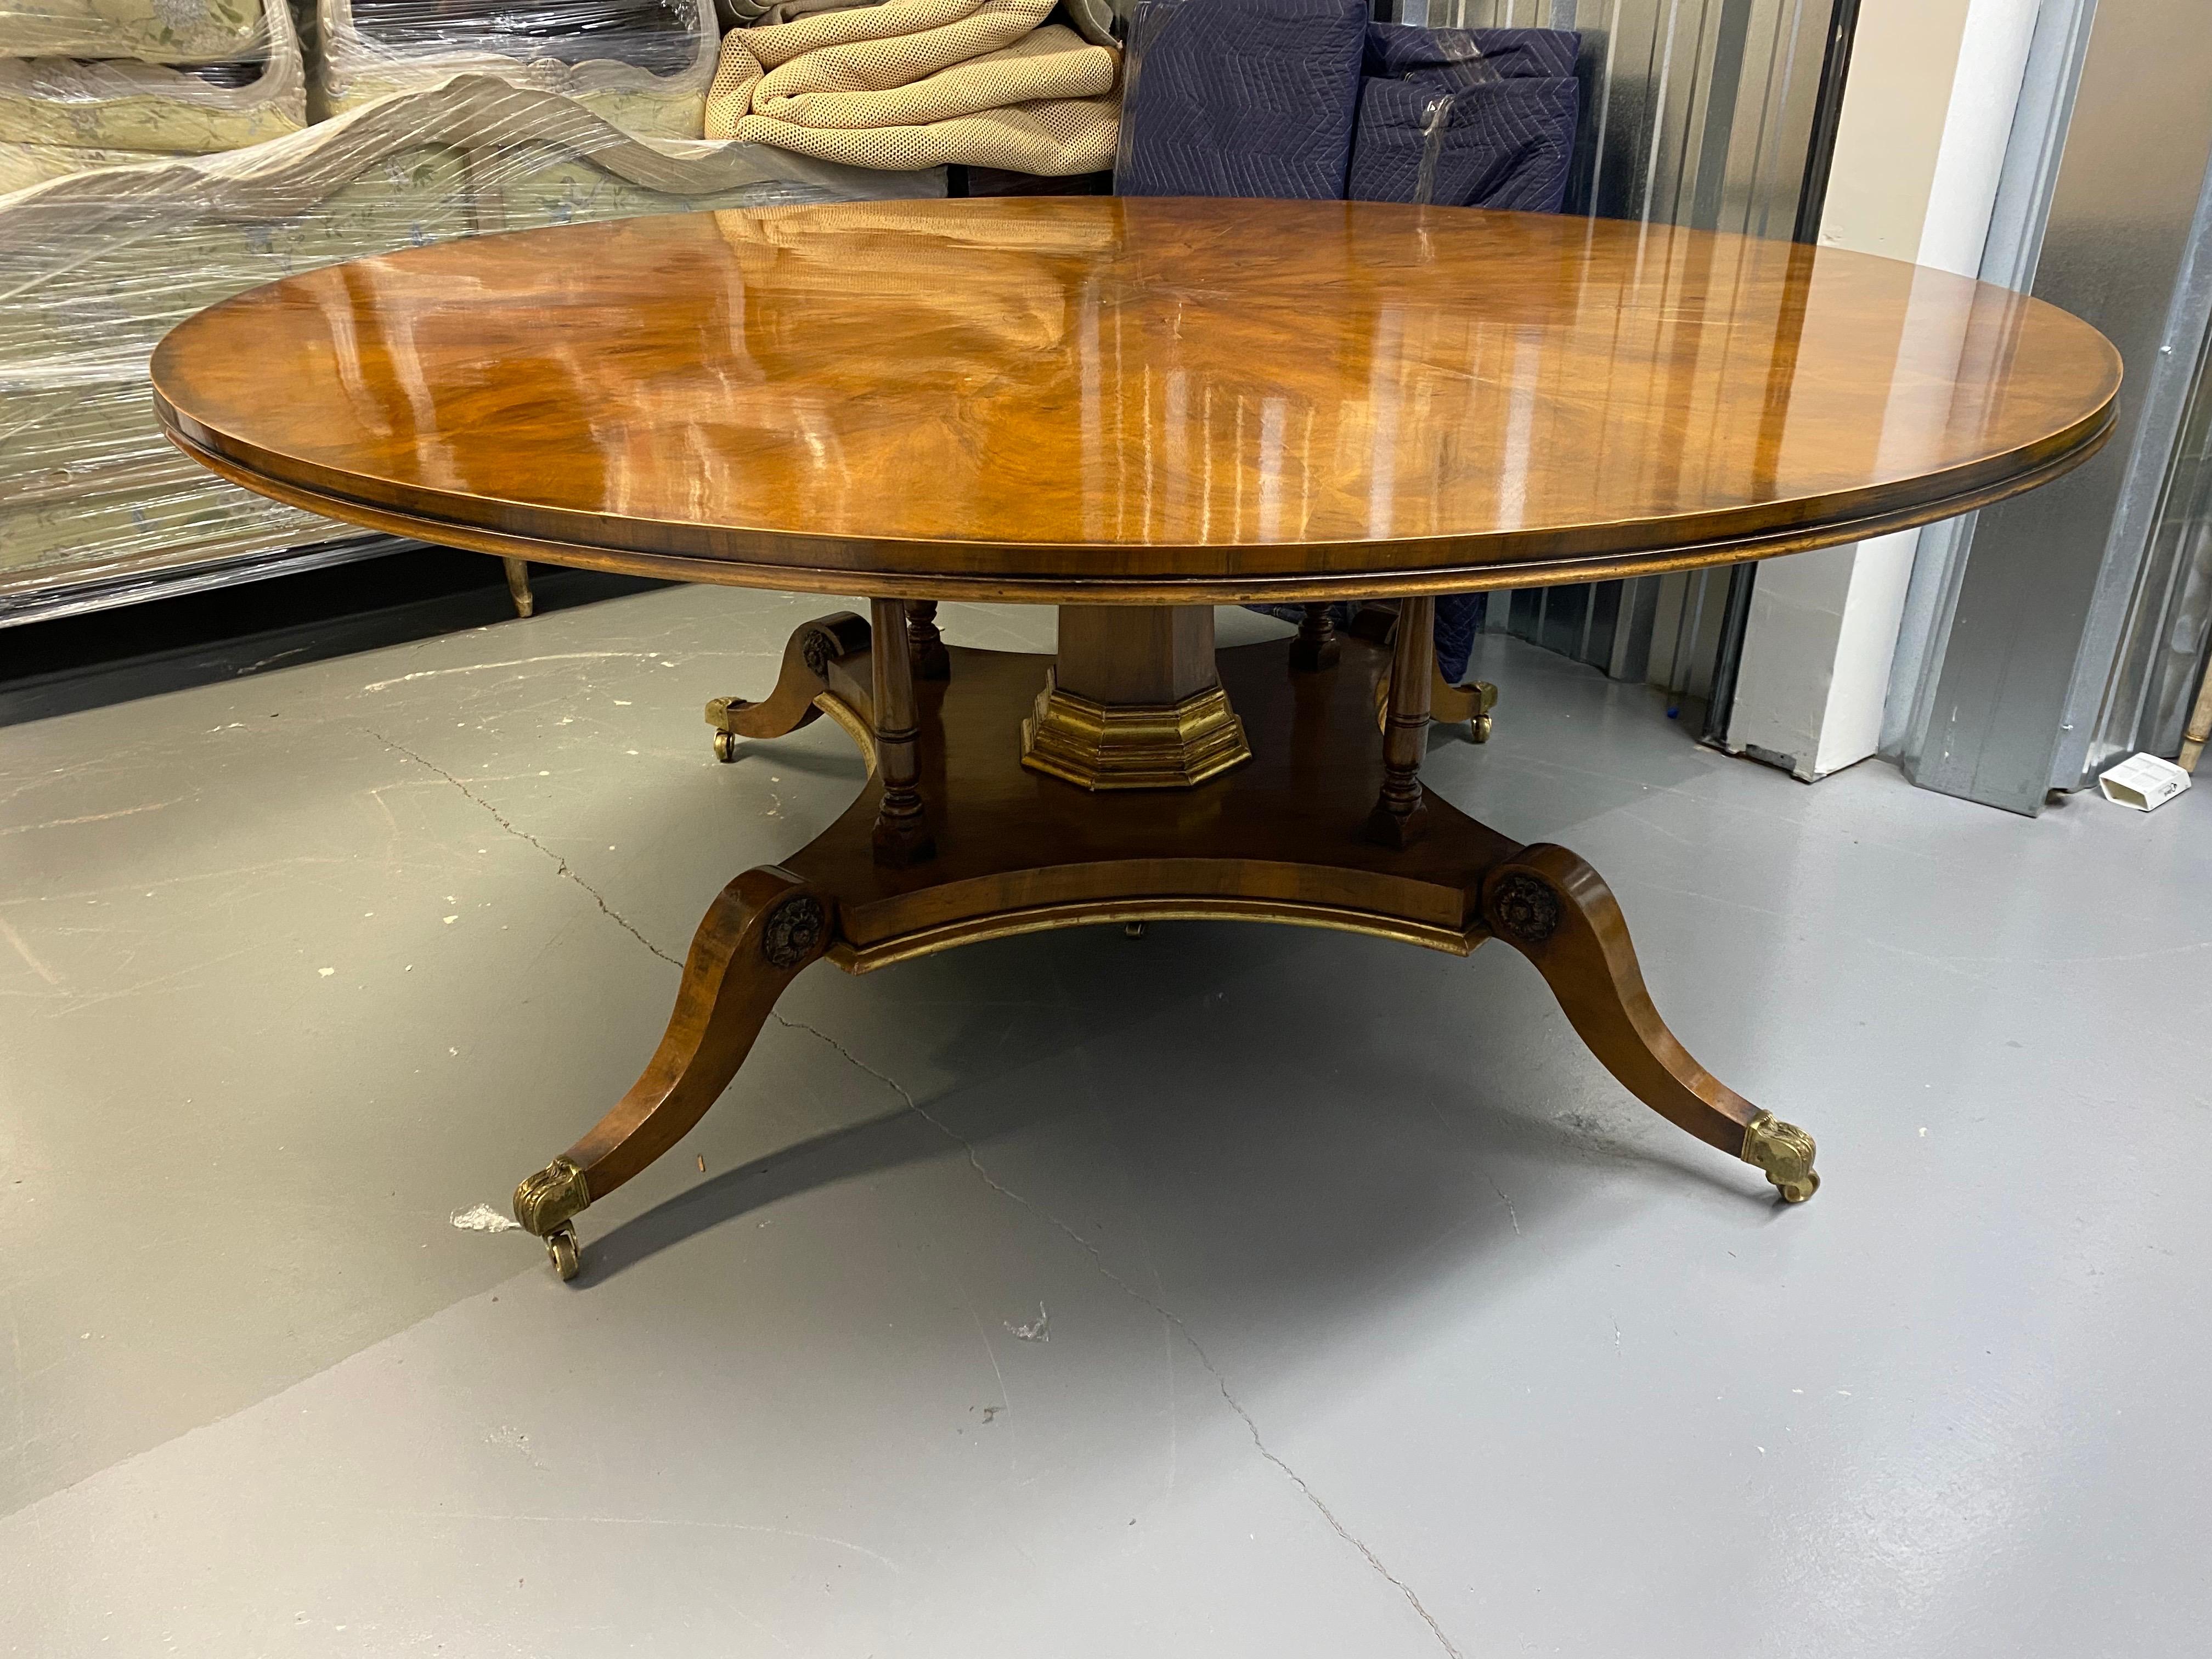 20th Century Georgian Style Large Round Starburst Matched Pedestal Table For Sale